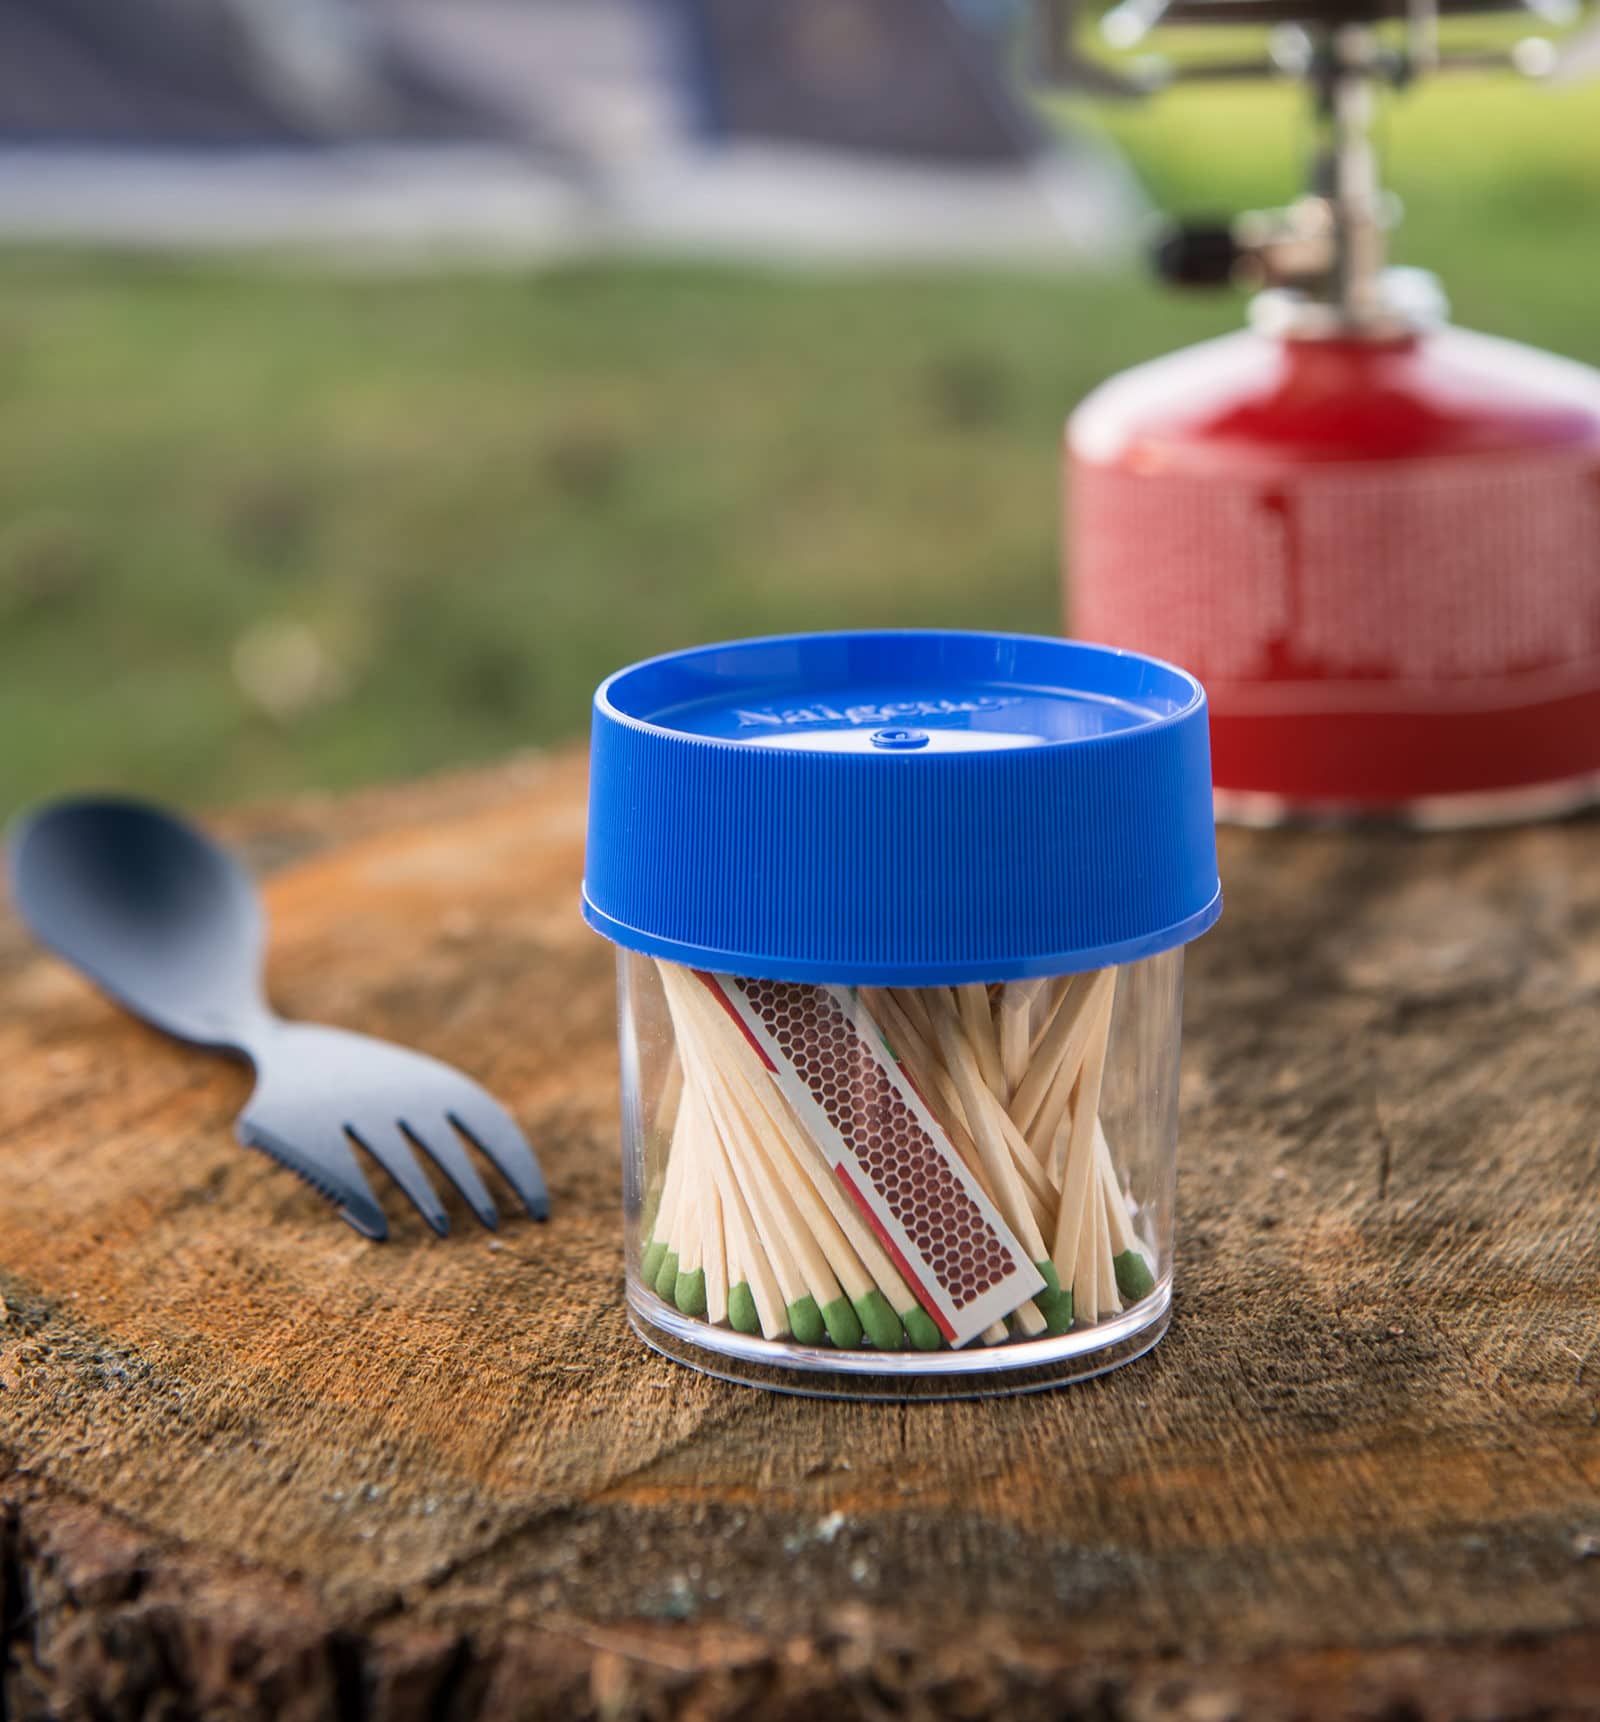 7 Times Our Plastic Containers Saved the Day - Nalgene